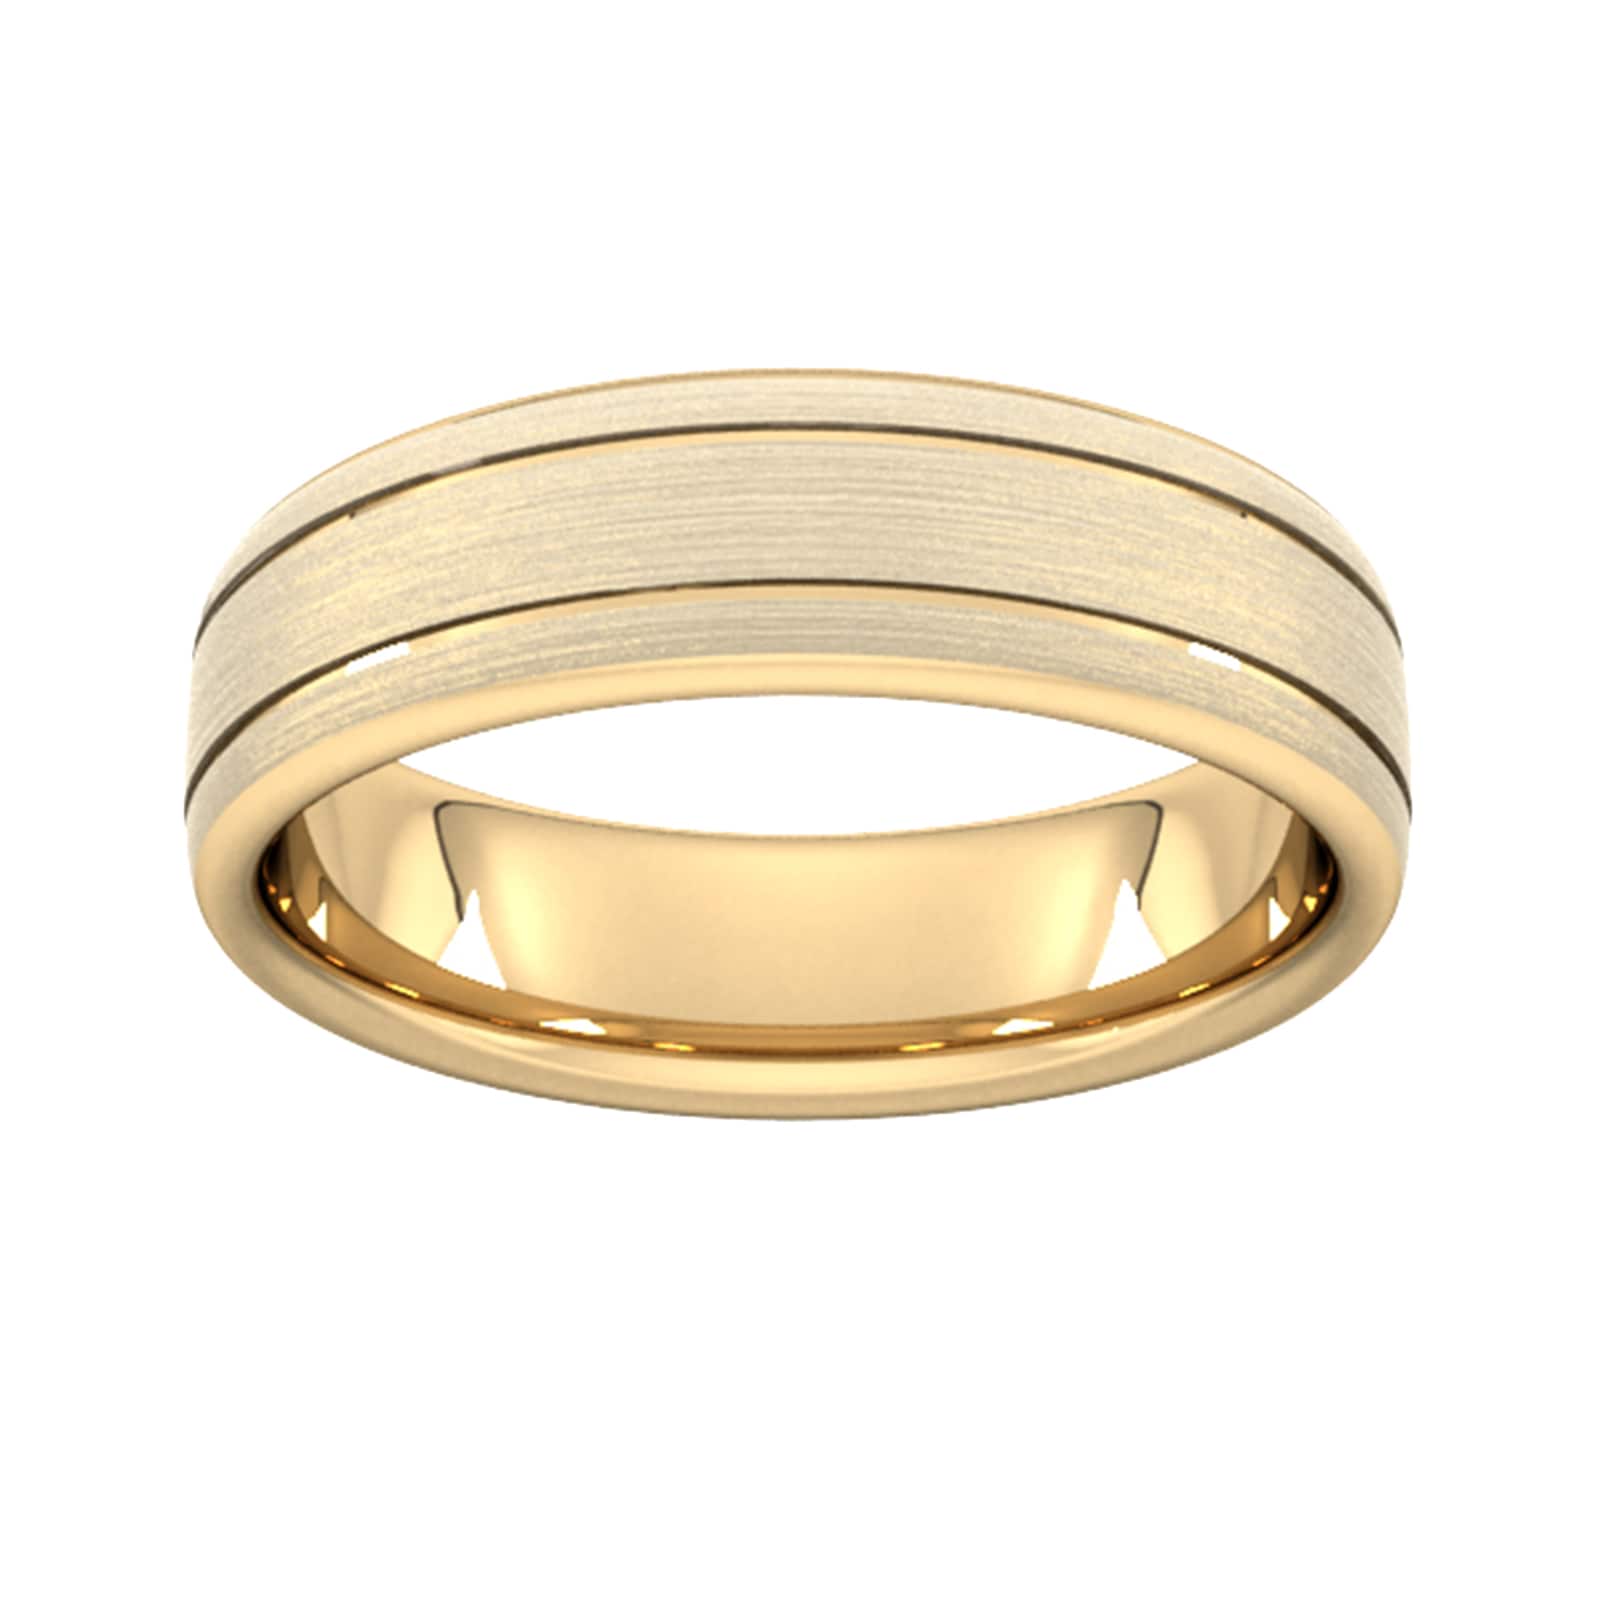 6mm Flat Court Heavy Matt Finish With Double Grooves Wedding Ring In 9 Carat Yellow Gold - Ring Size N